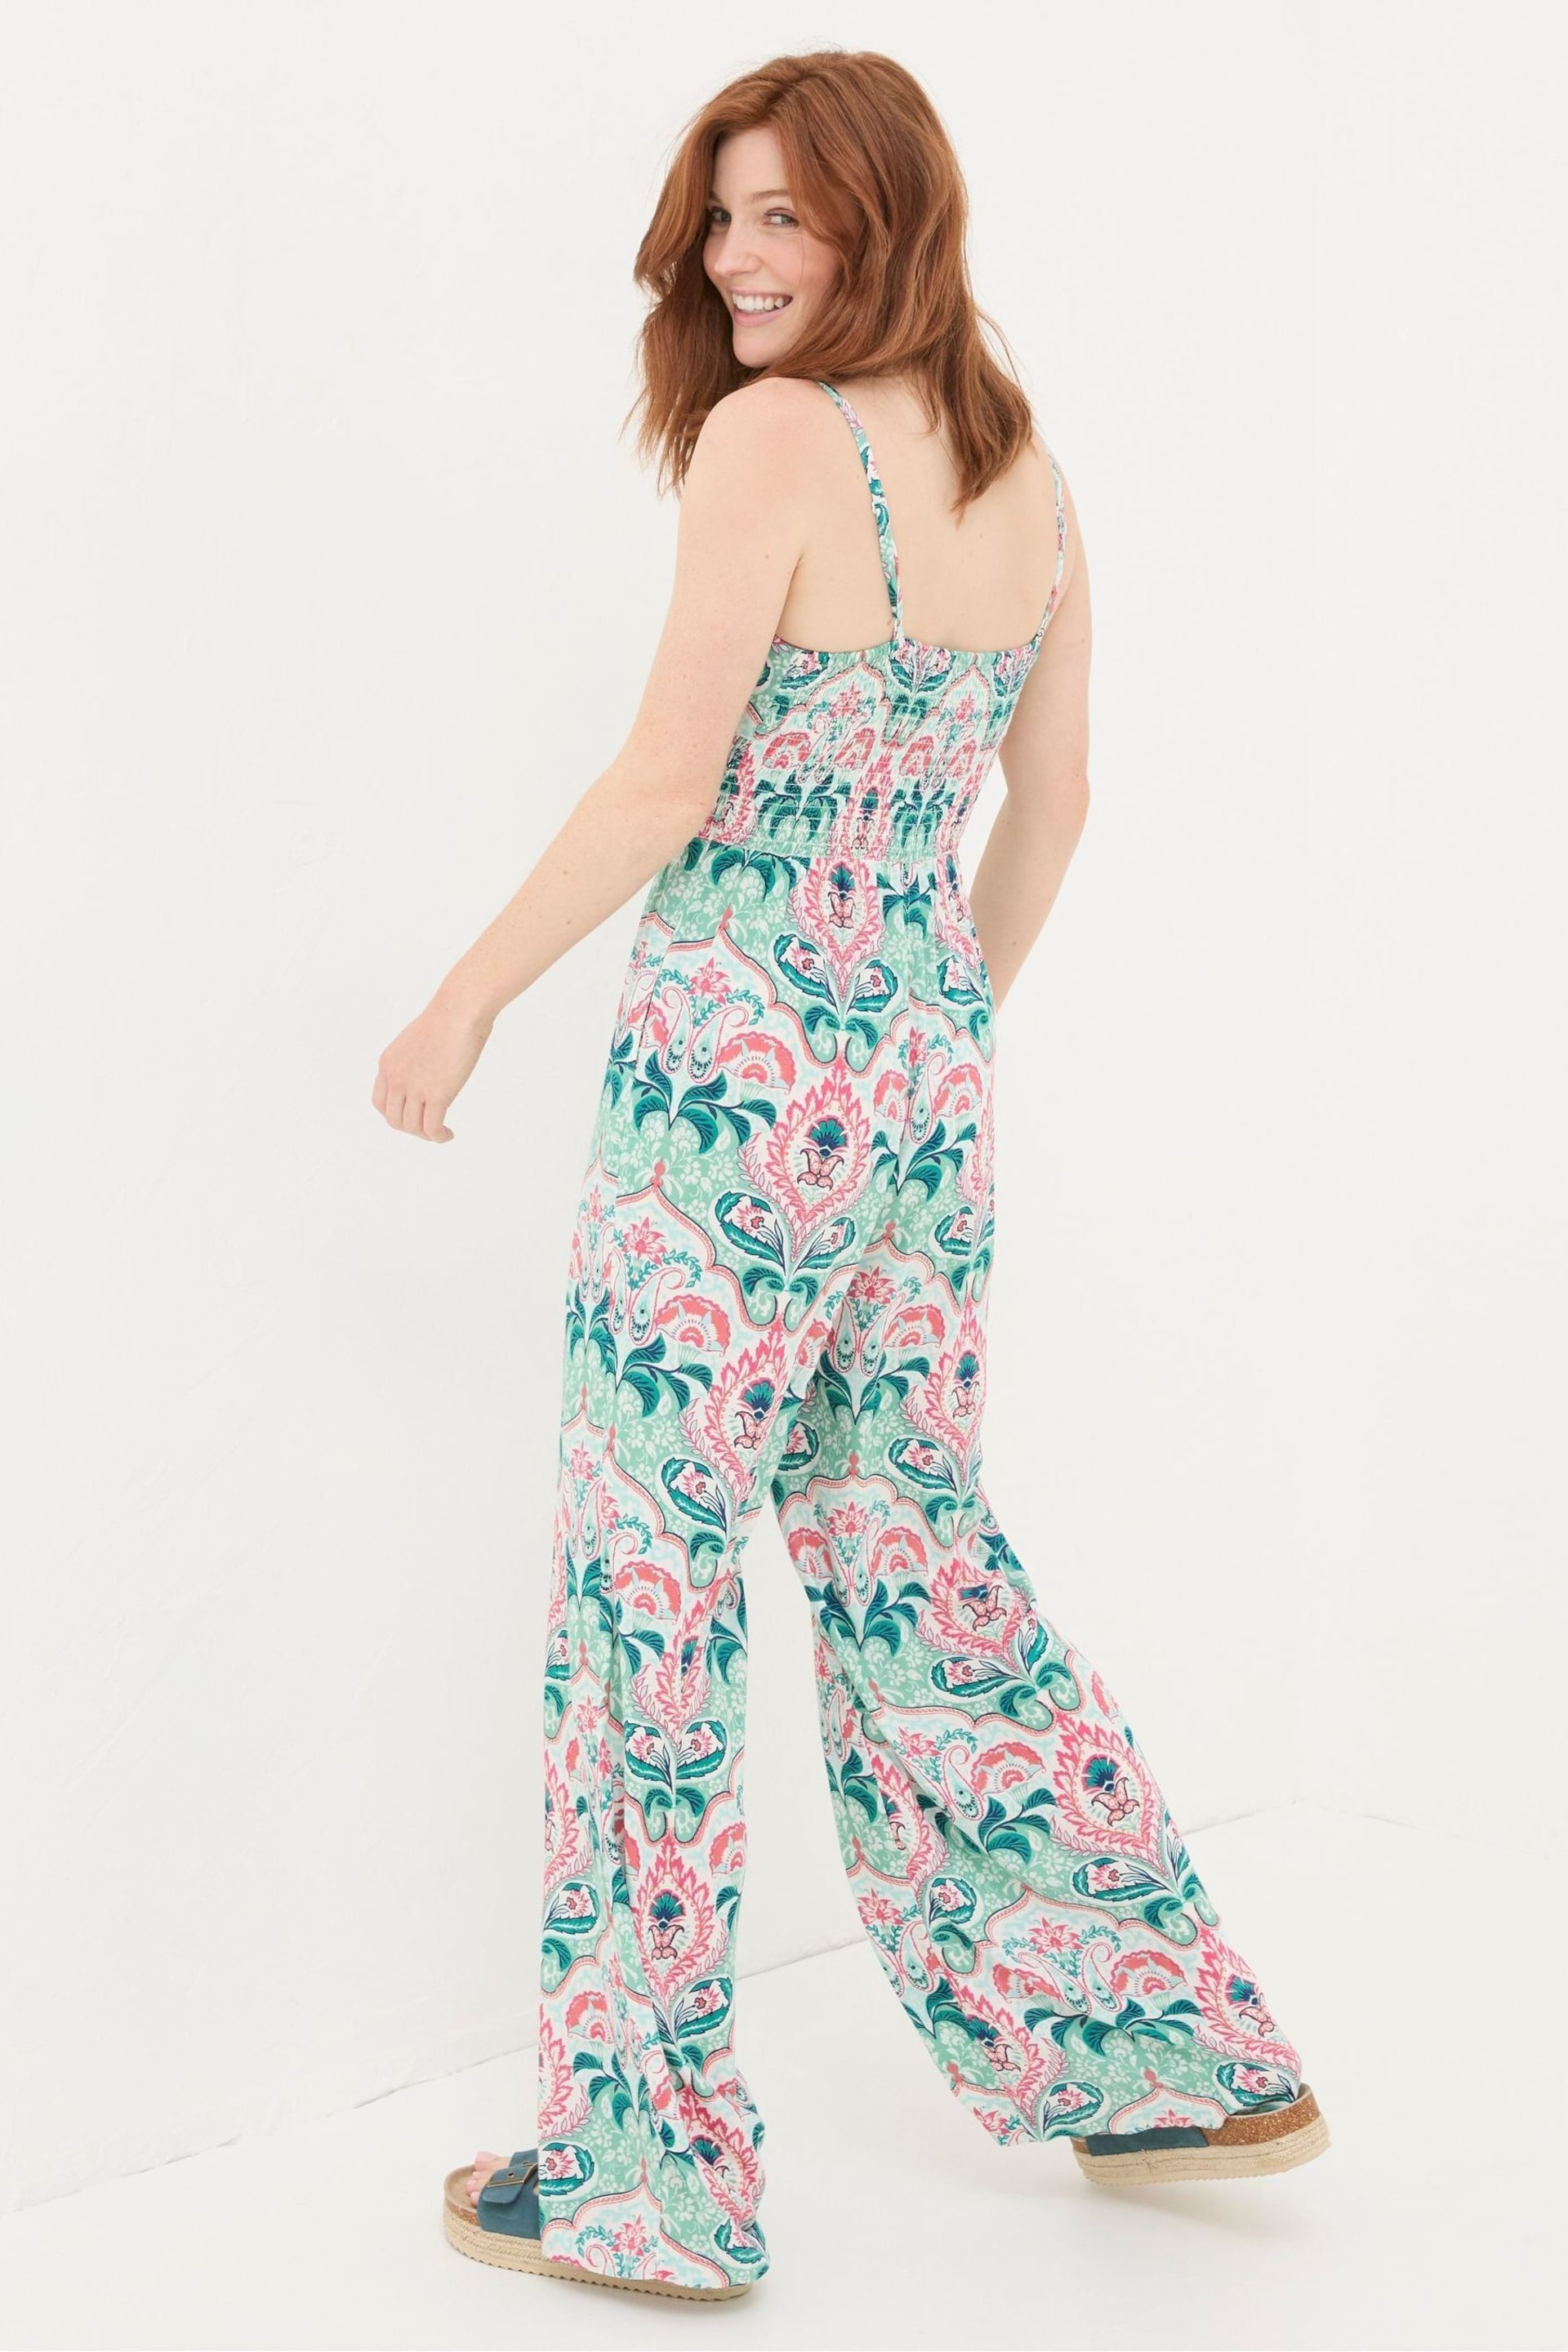 FatFace Green Mirrored Paisley Jumpsuit - Image 2 of 5